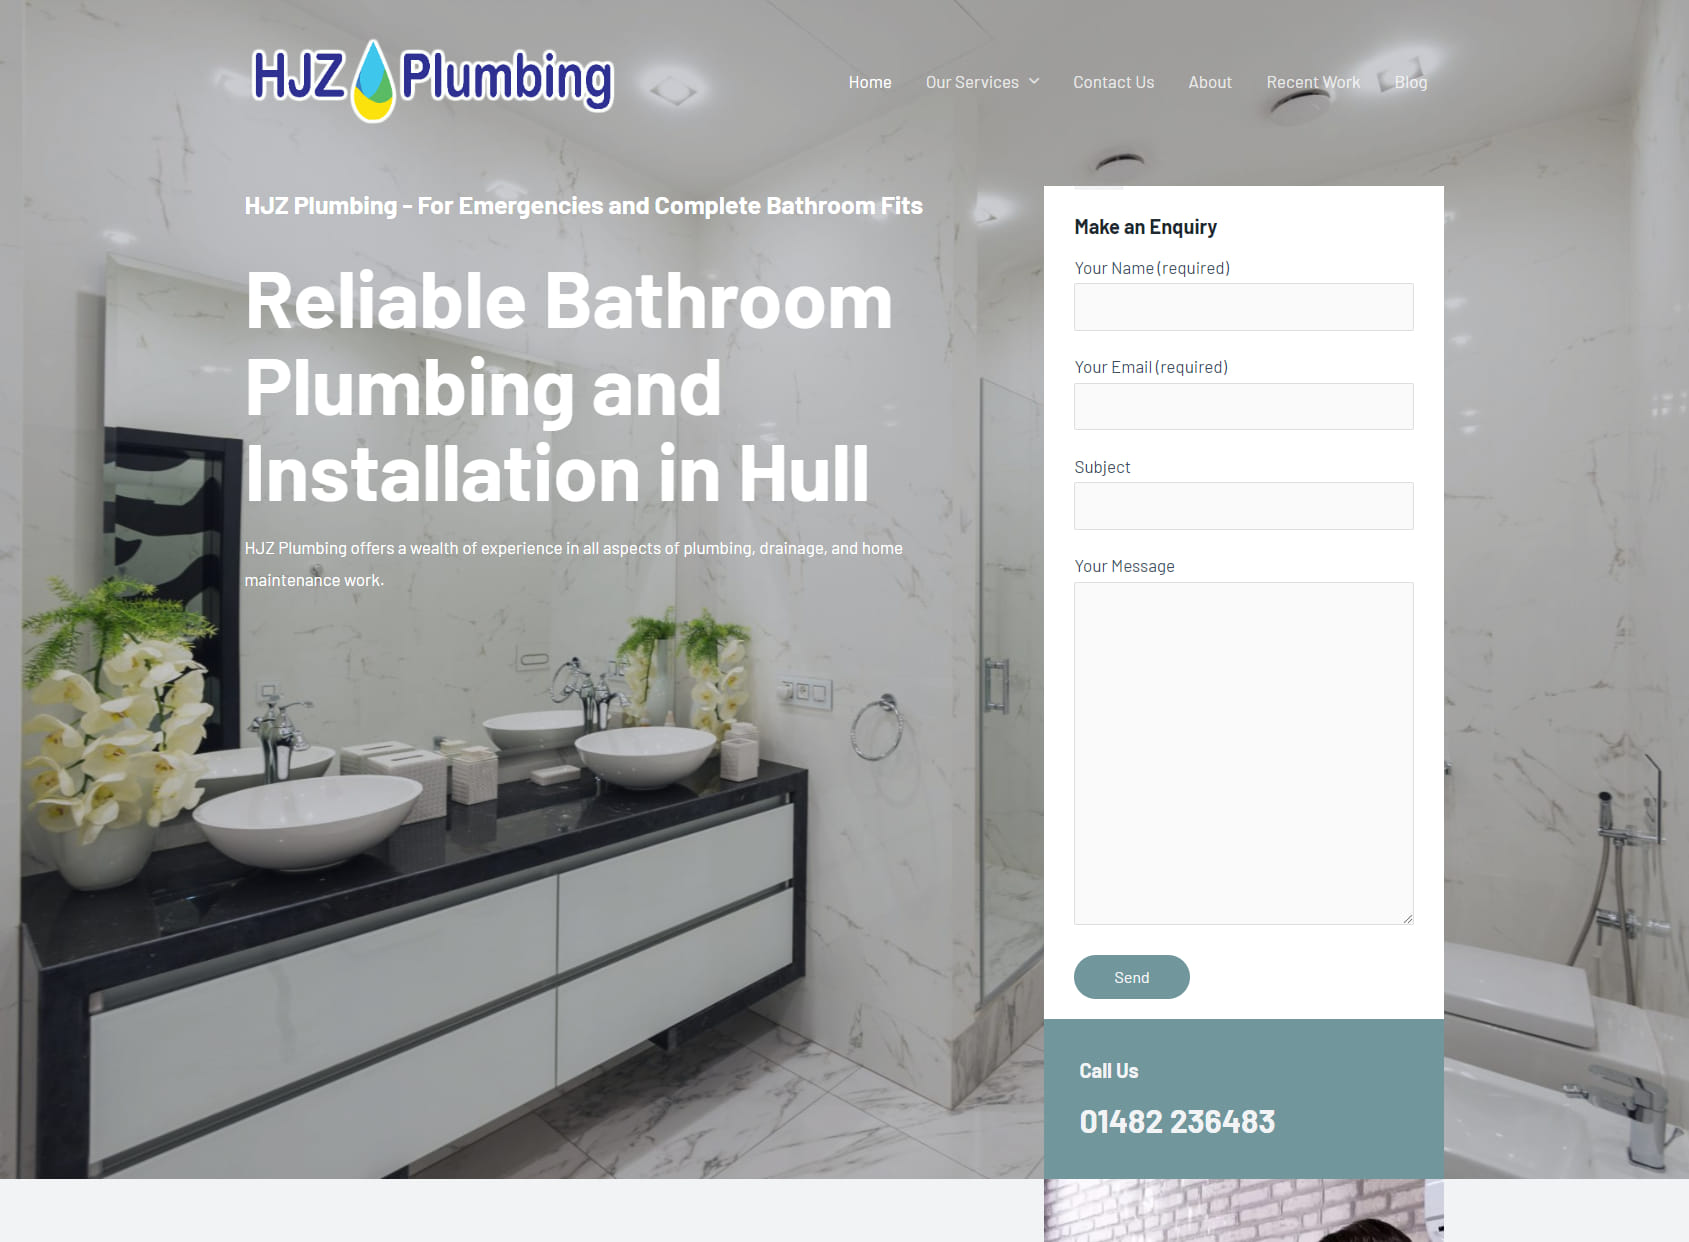 HJZ Plumbing - Affordable Plumbing Services